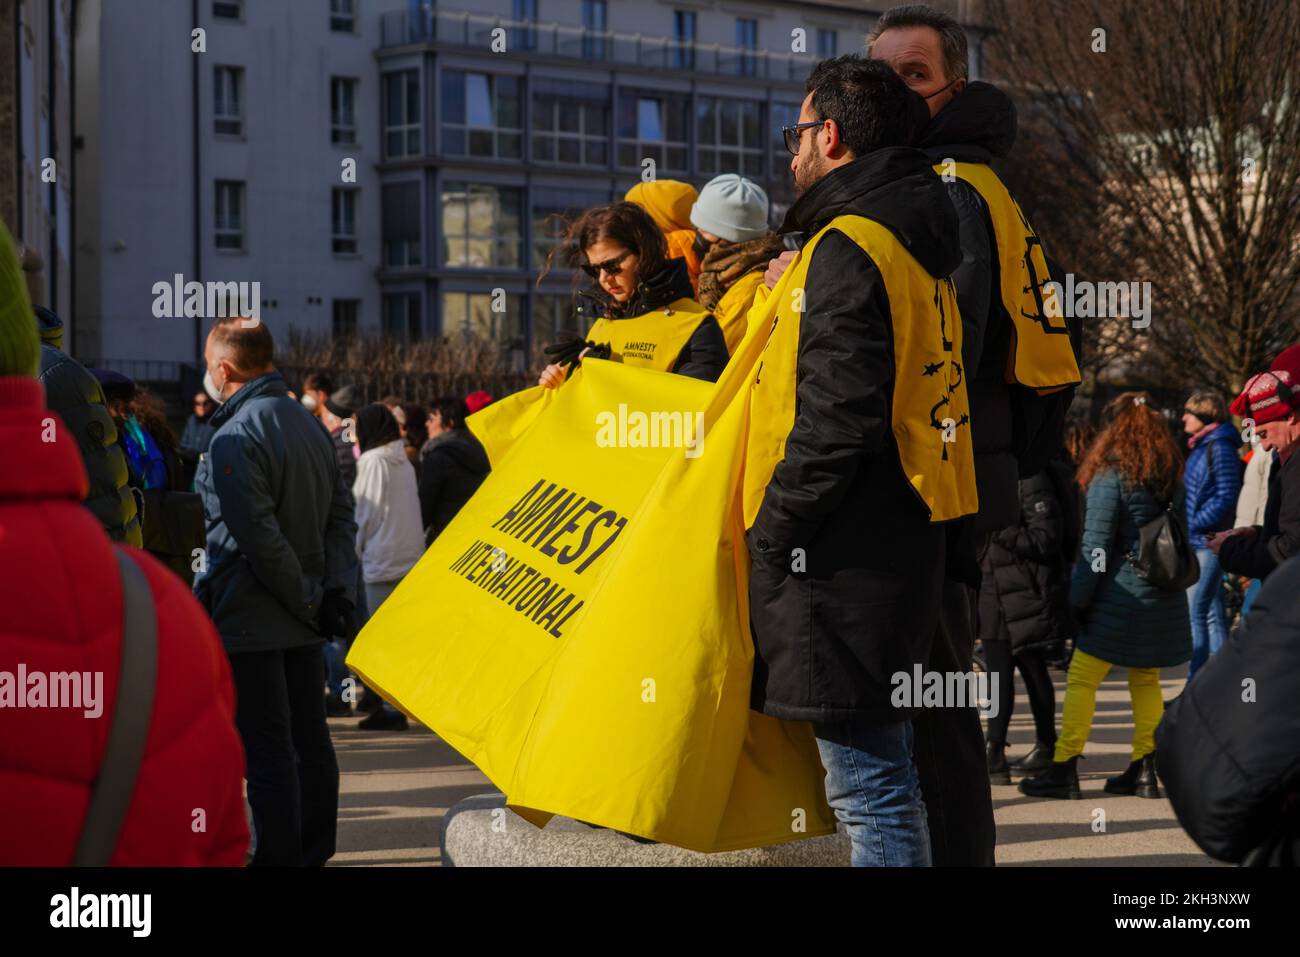 Members of Amnesty International hold a large yellow banner with their logo in front of them at a demonstration against Putin's war in Ukraine. Stock Photo